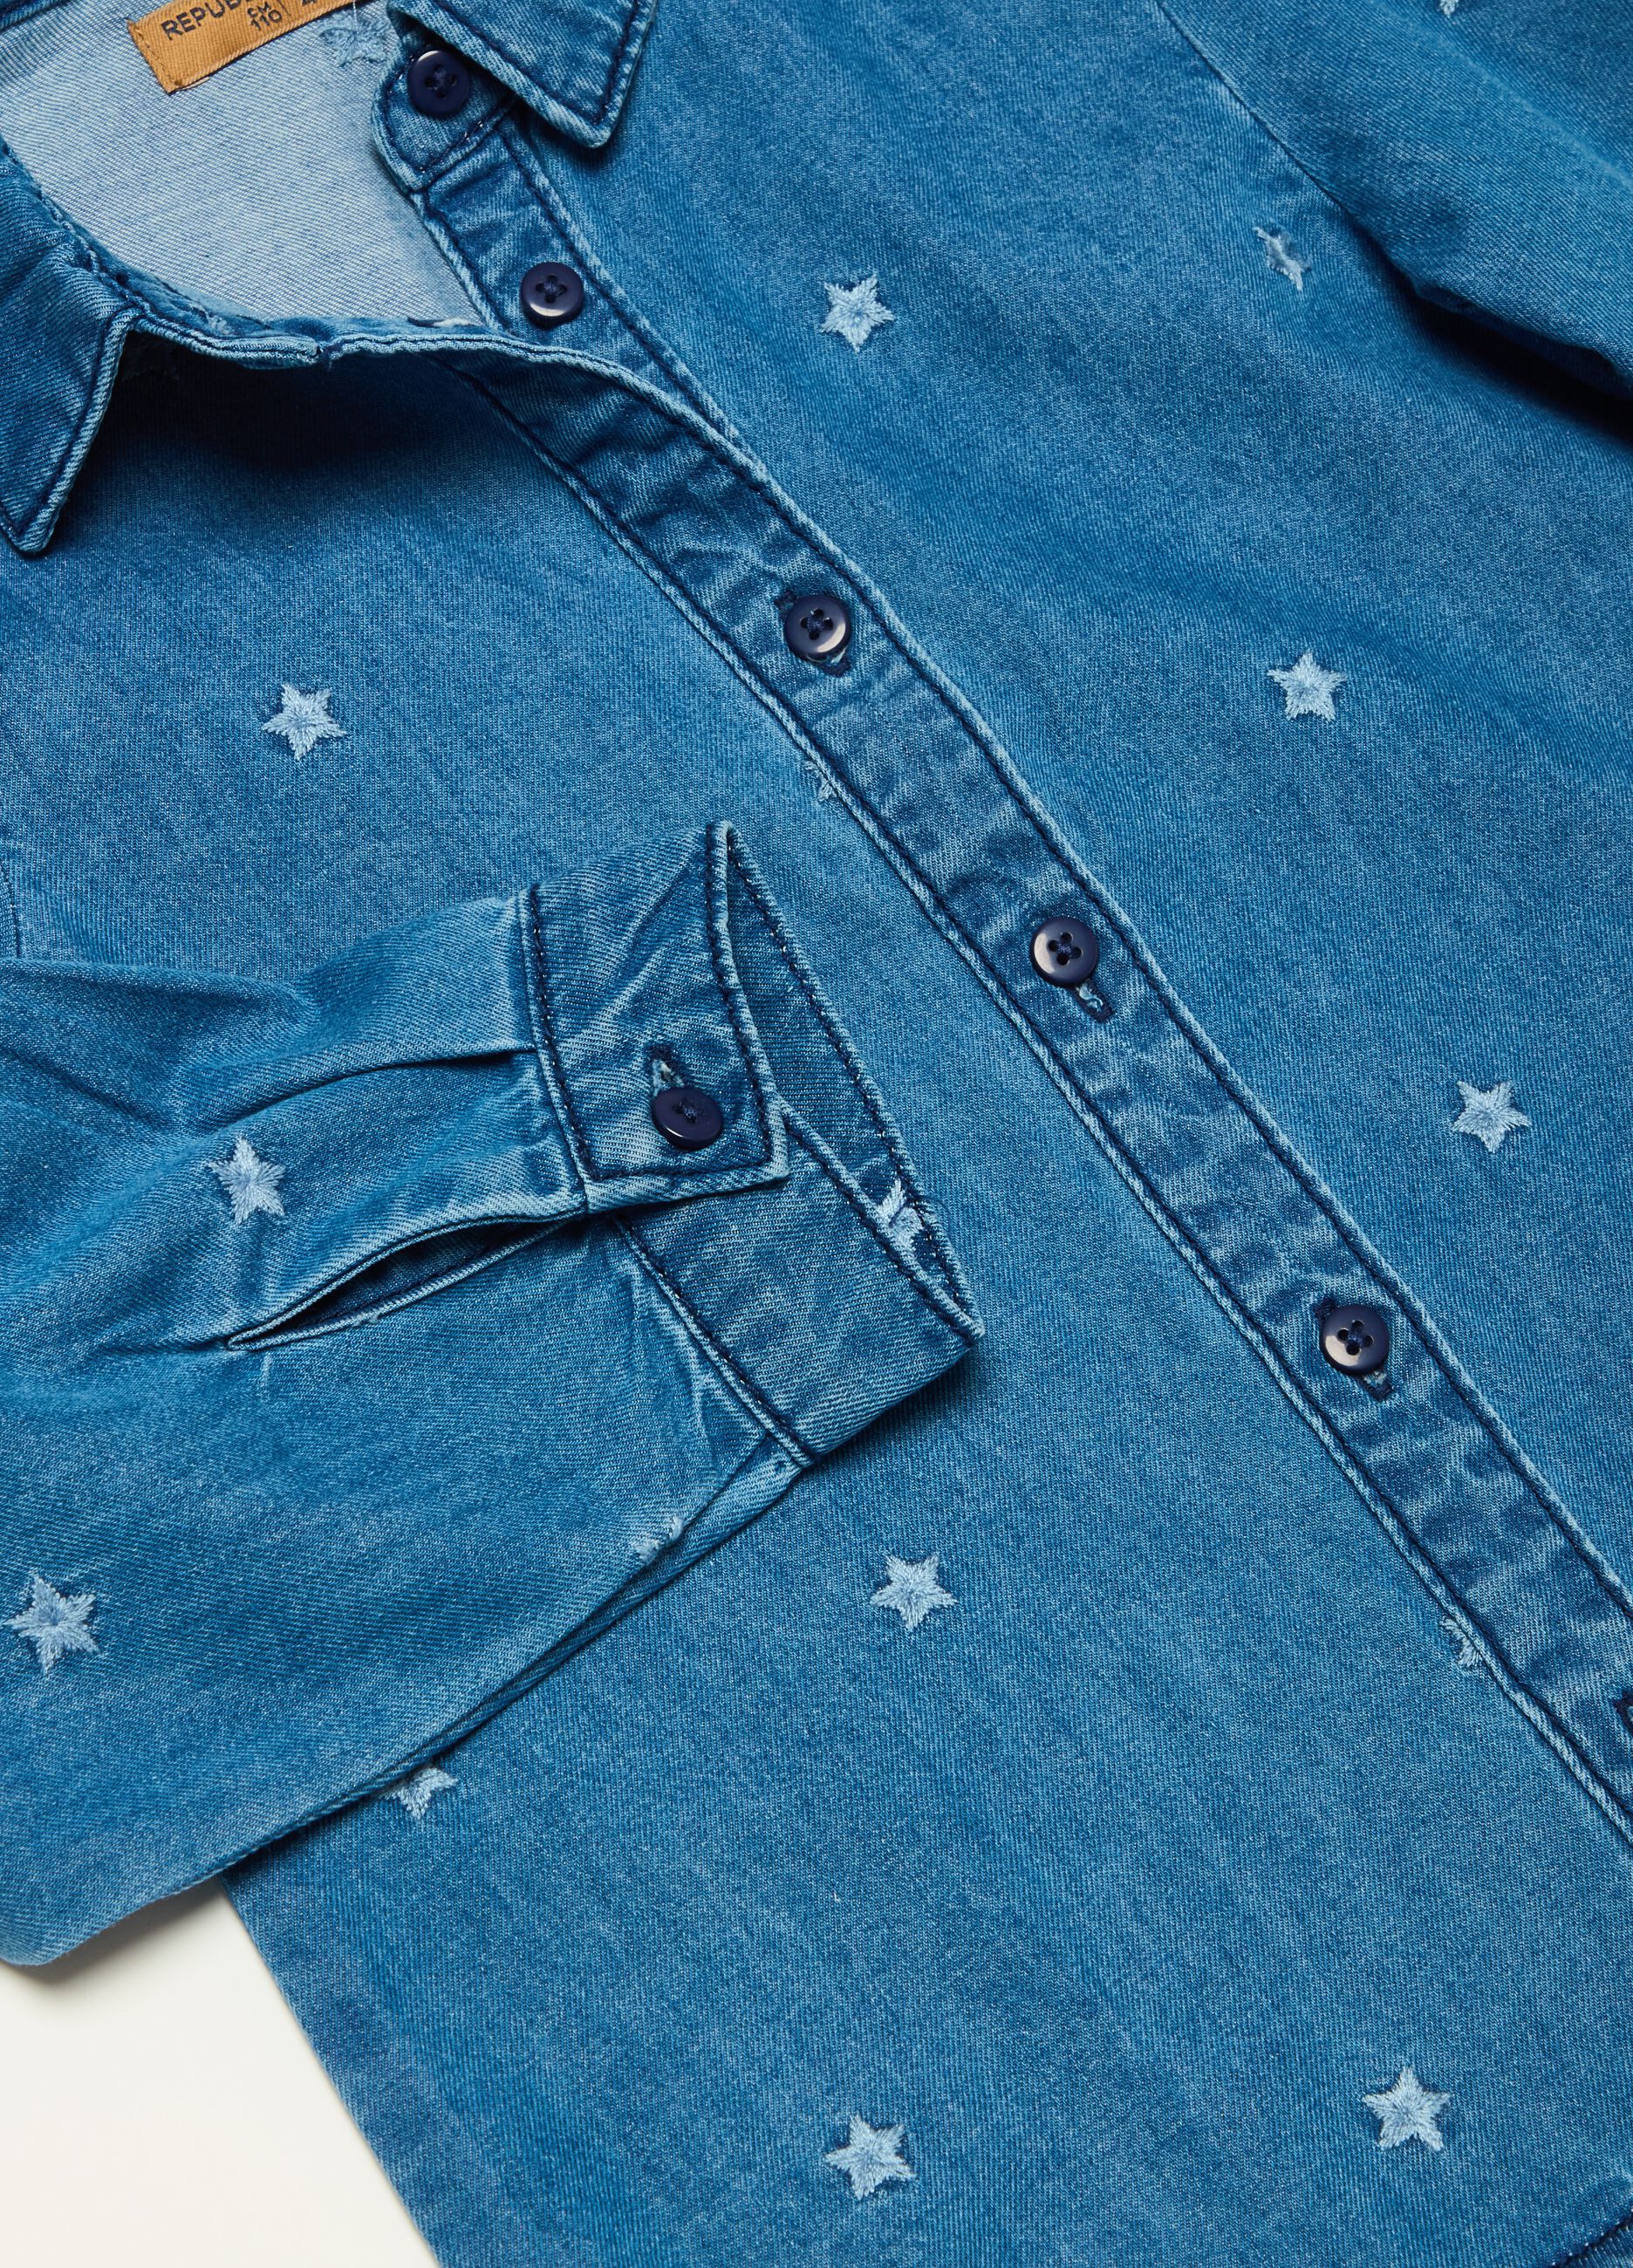 Denim shirt with stars embroidery